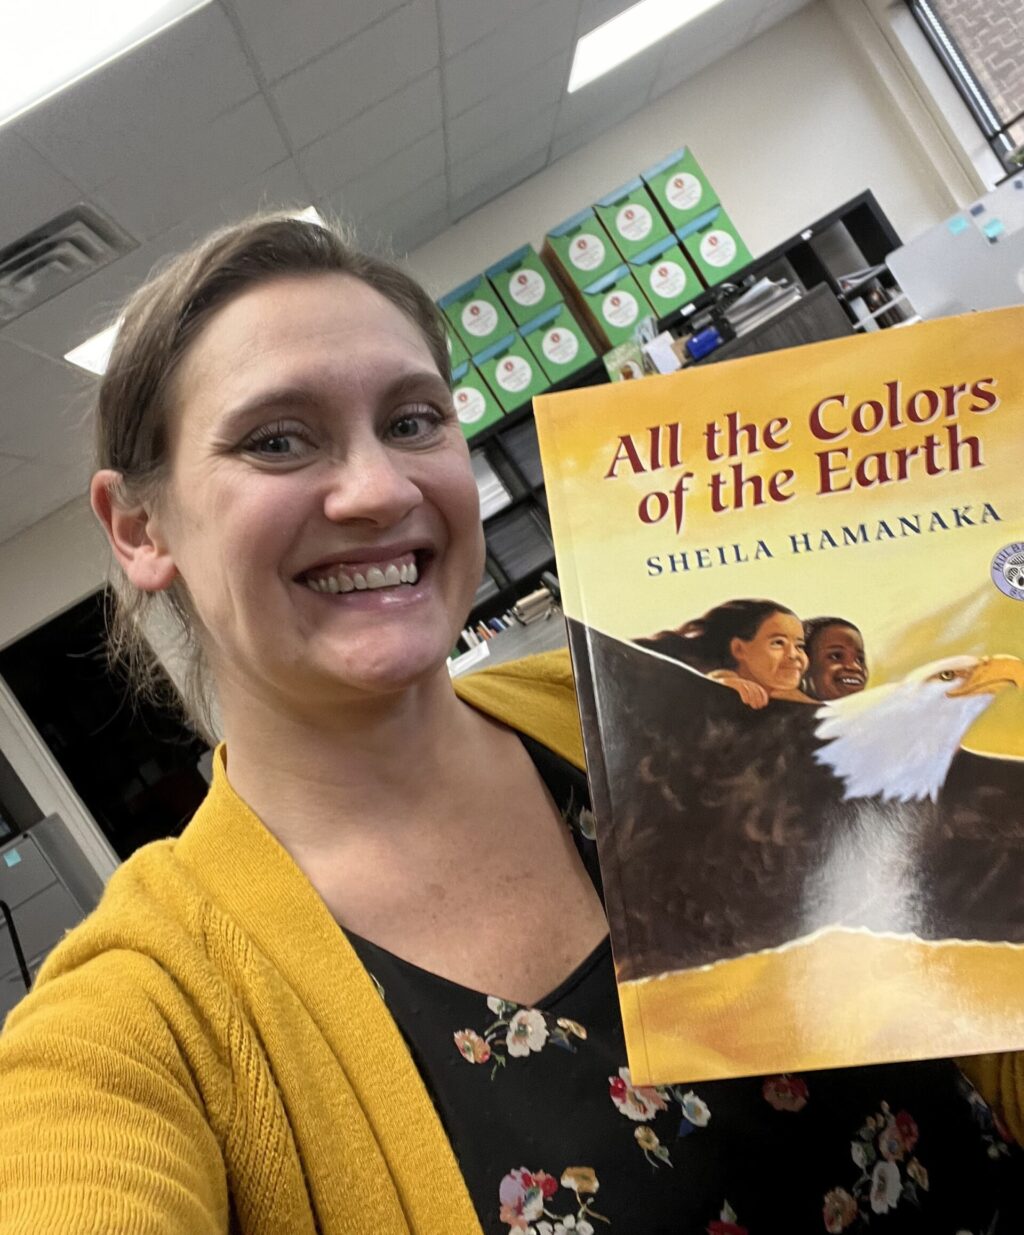 A selfie of Jenni posing with children's book, "All the Colors of the Earth." The book pictures two children riding a flying eagle in a yellow sky. Jenni wears a matching yellow cardigan and a black floral shirt.